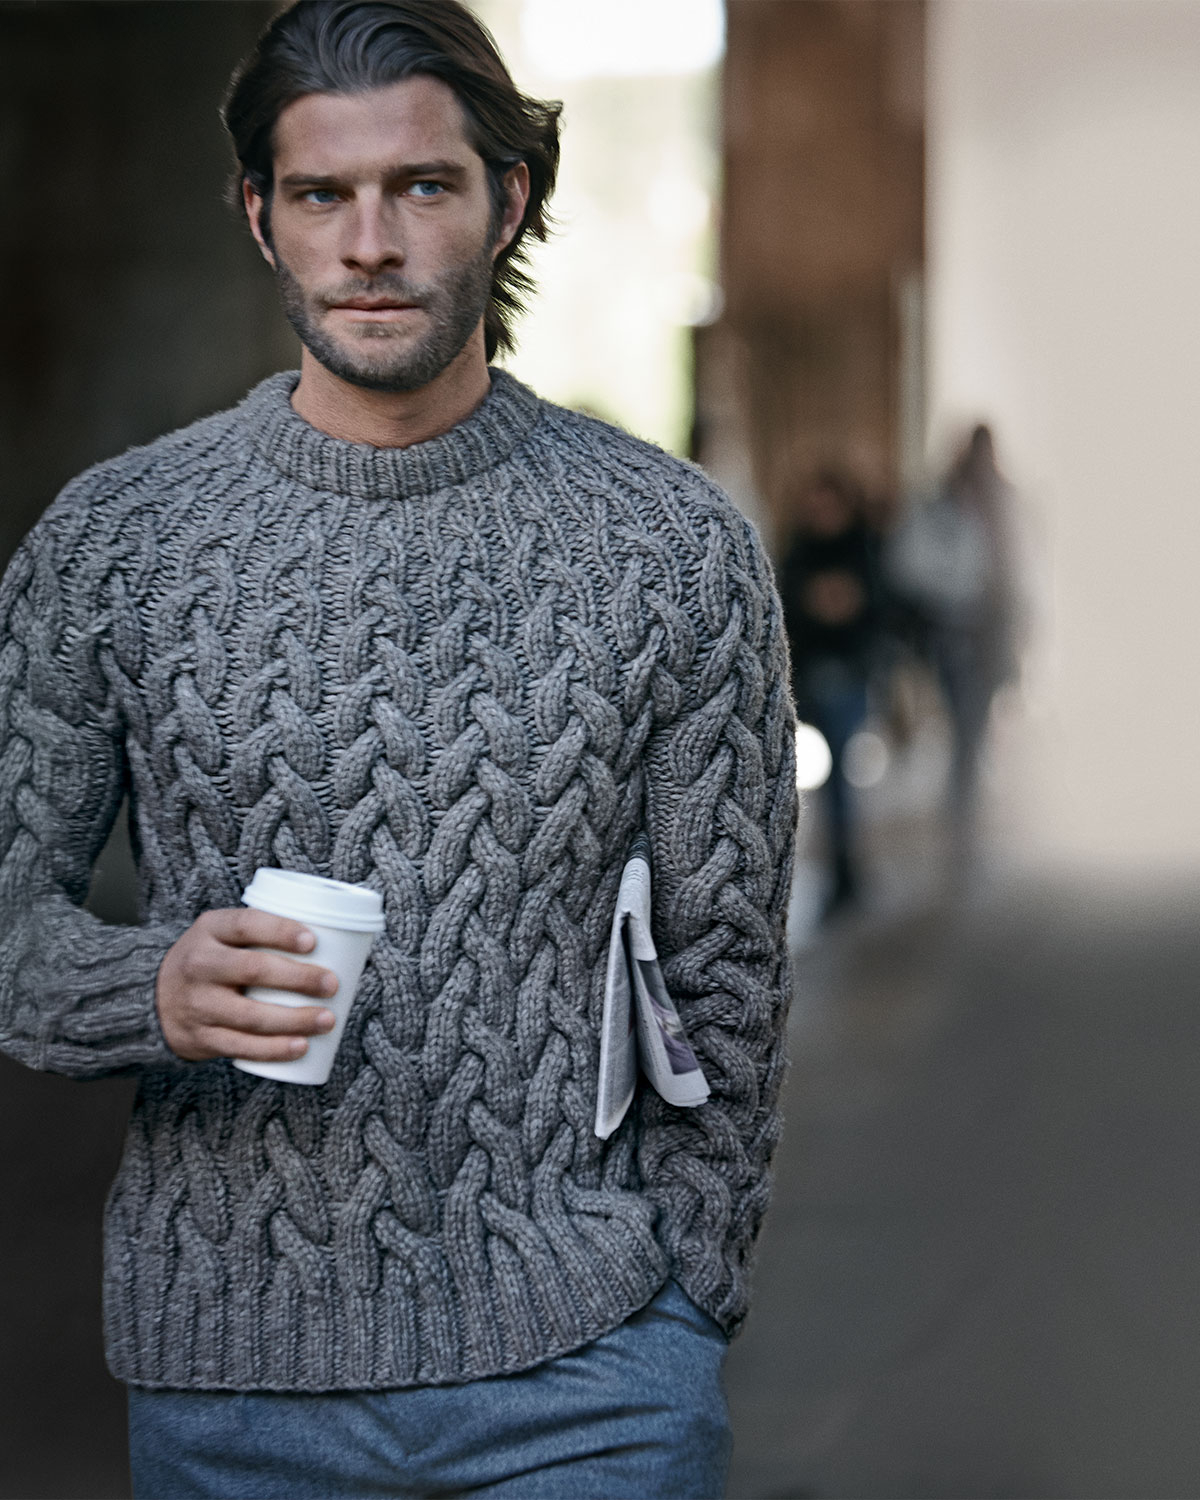 Lyst - Michael Kors Chunky Cable-Knit Sweater in Gray for Men